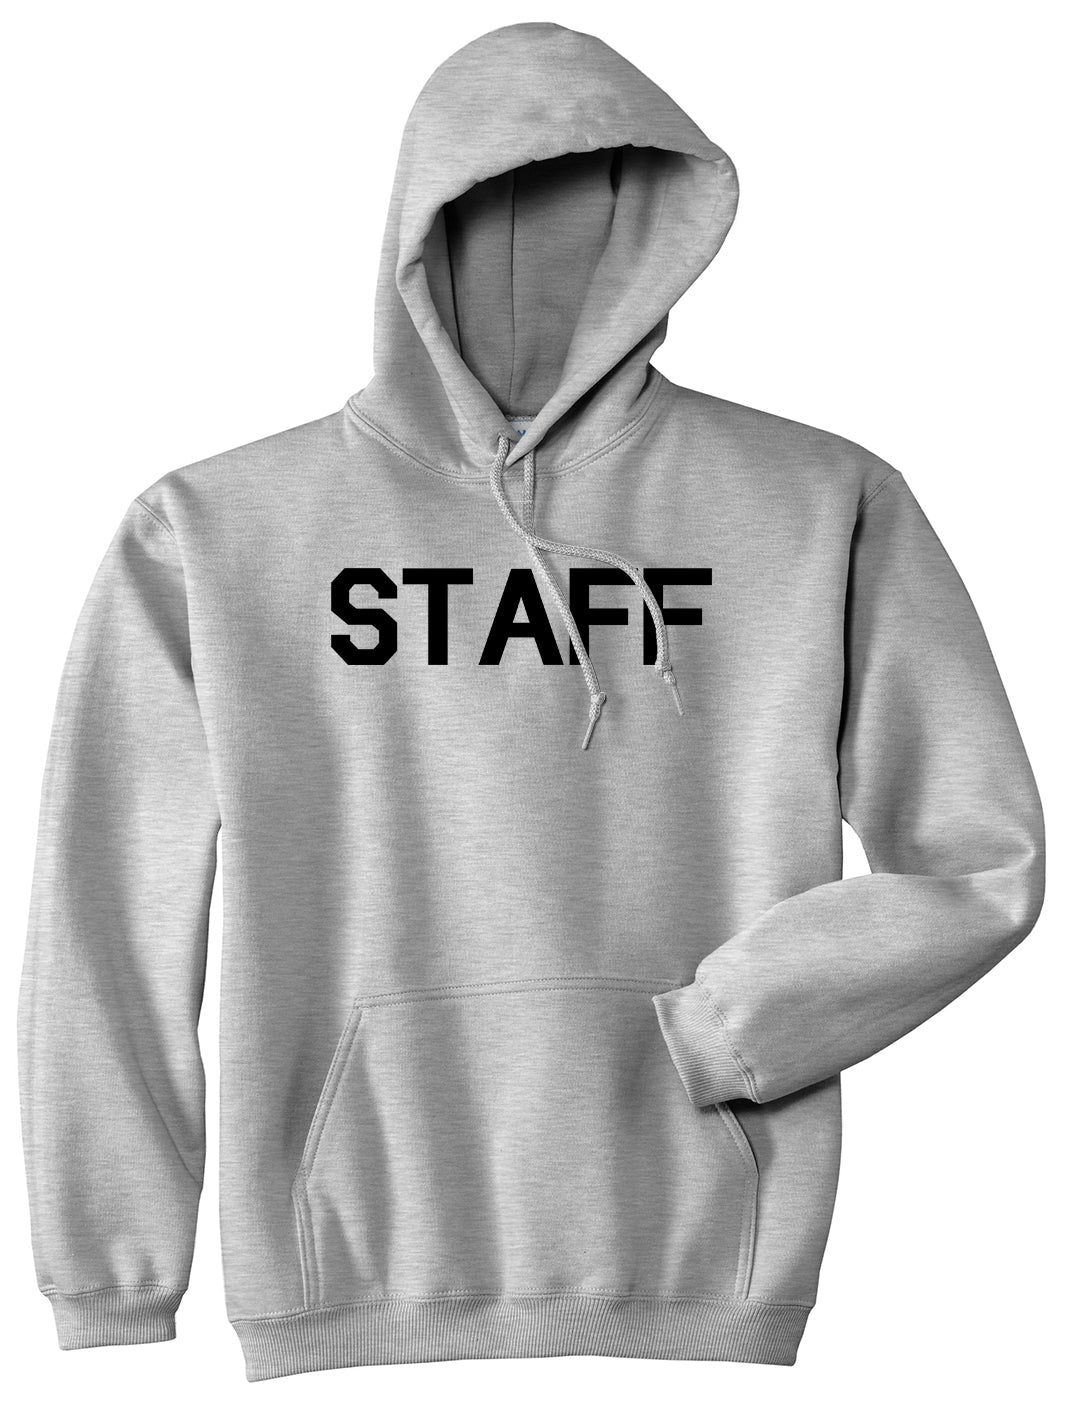 Staff Club Concert Event Mens Grey Pullover Hoodie by KINGS OF NY